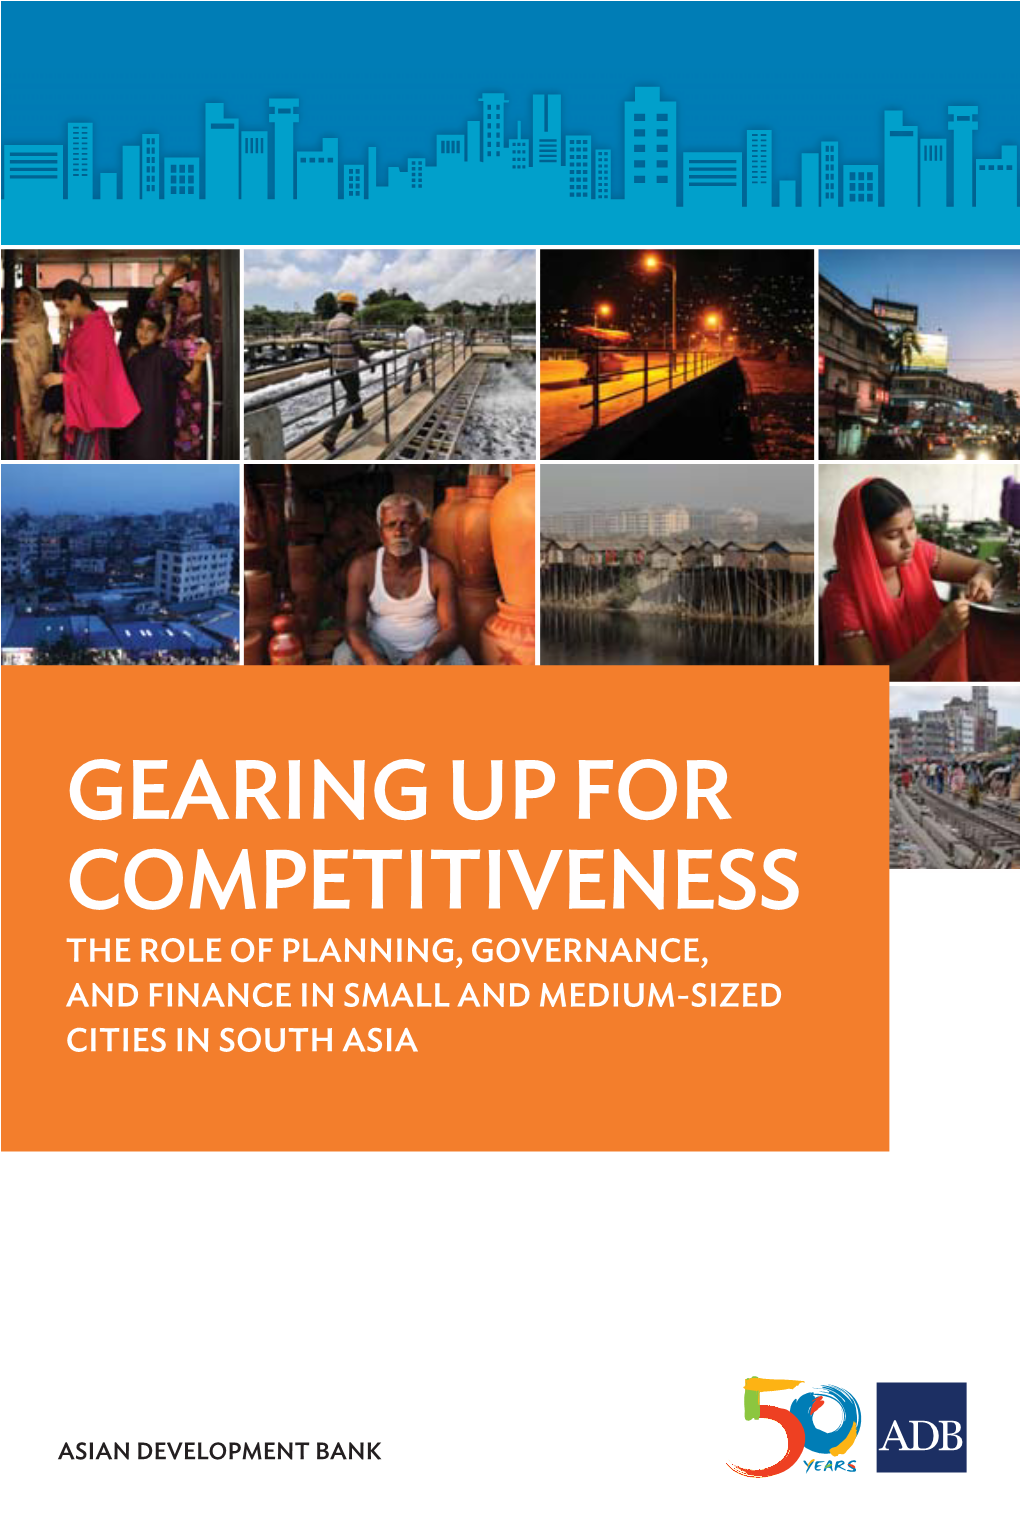 Gearing up for Competitiveness the Role of Planning, Governance, and Finance in Small and Medium-Sized Cities in South Asia